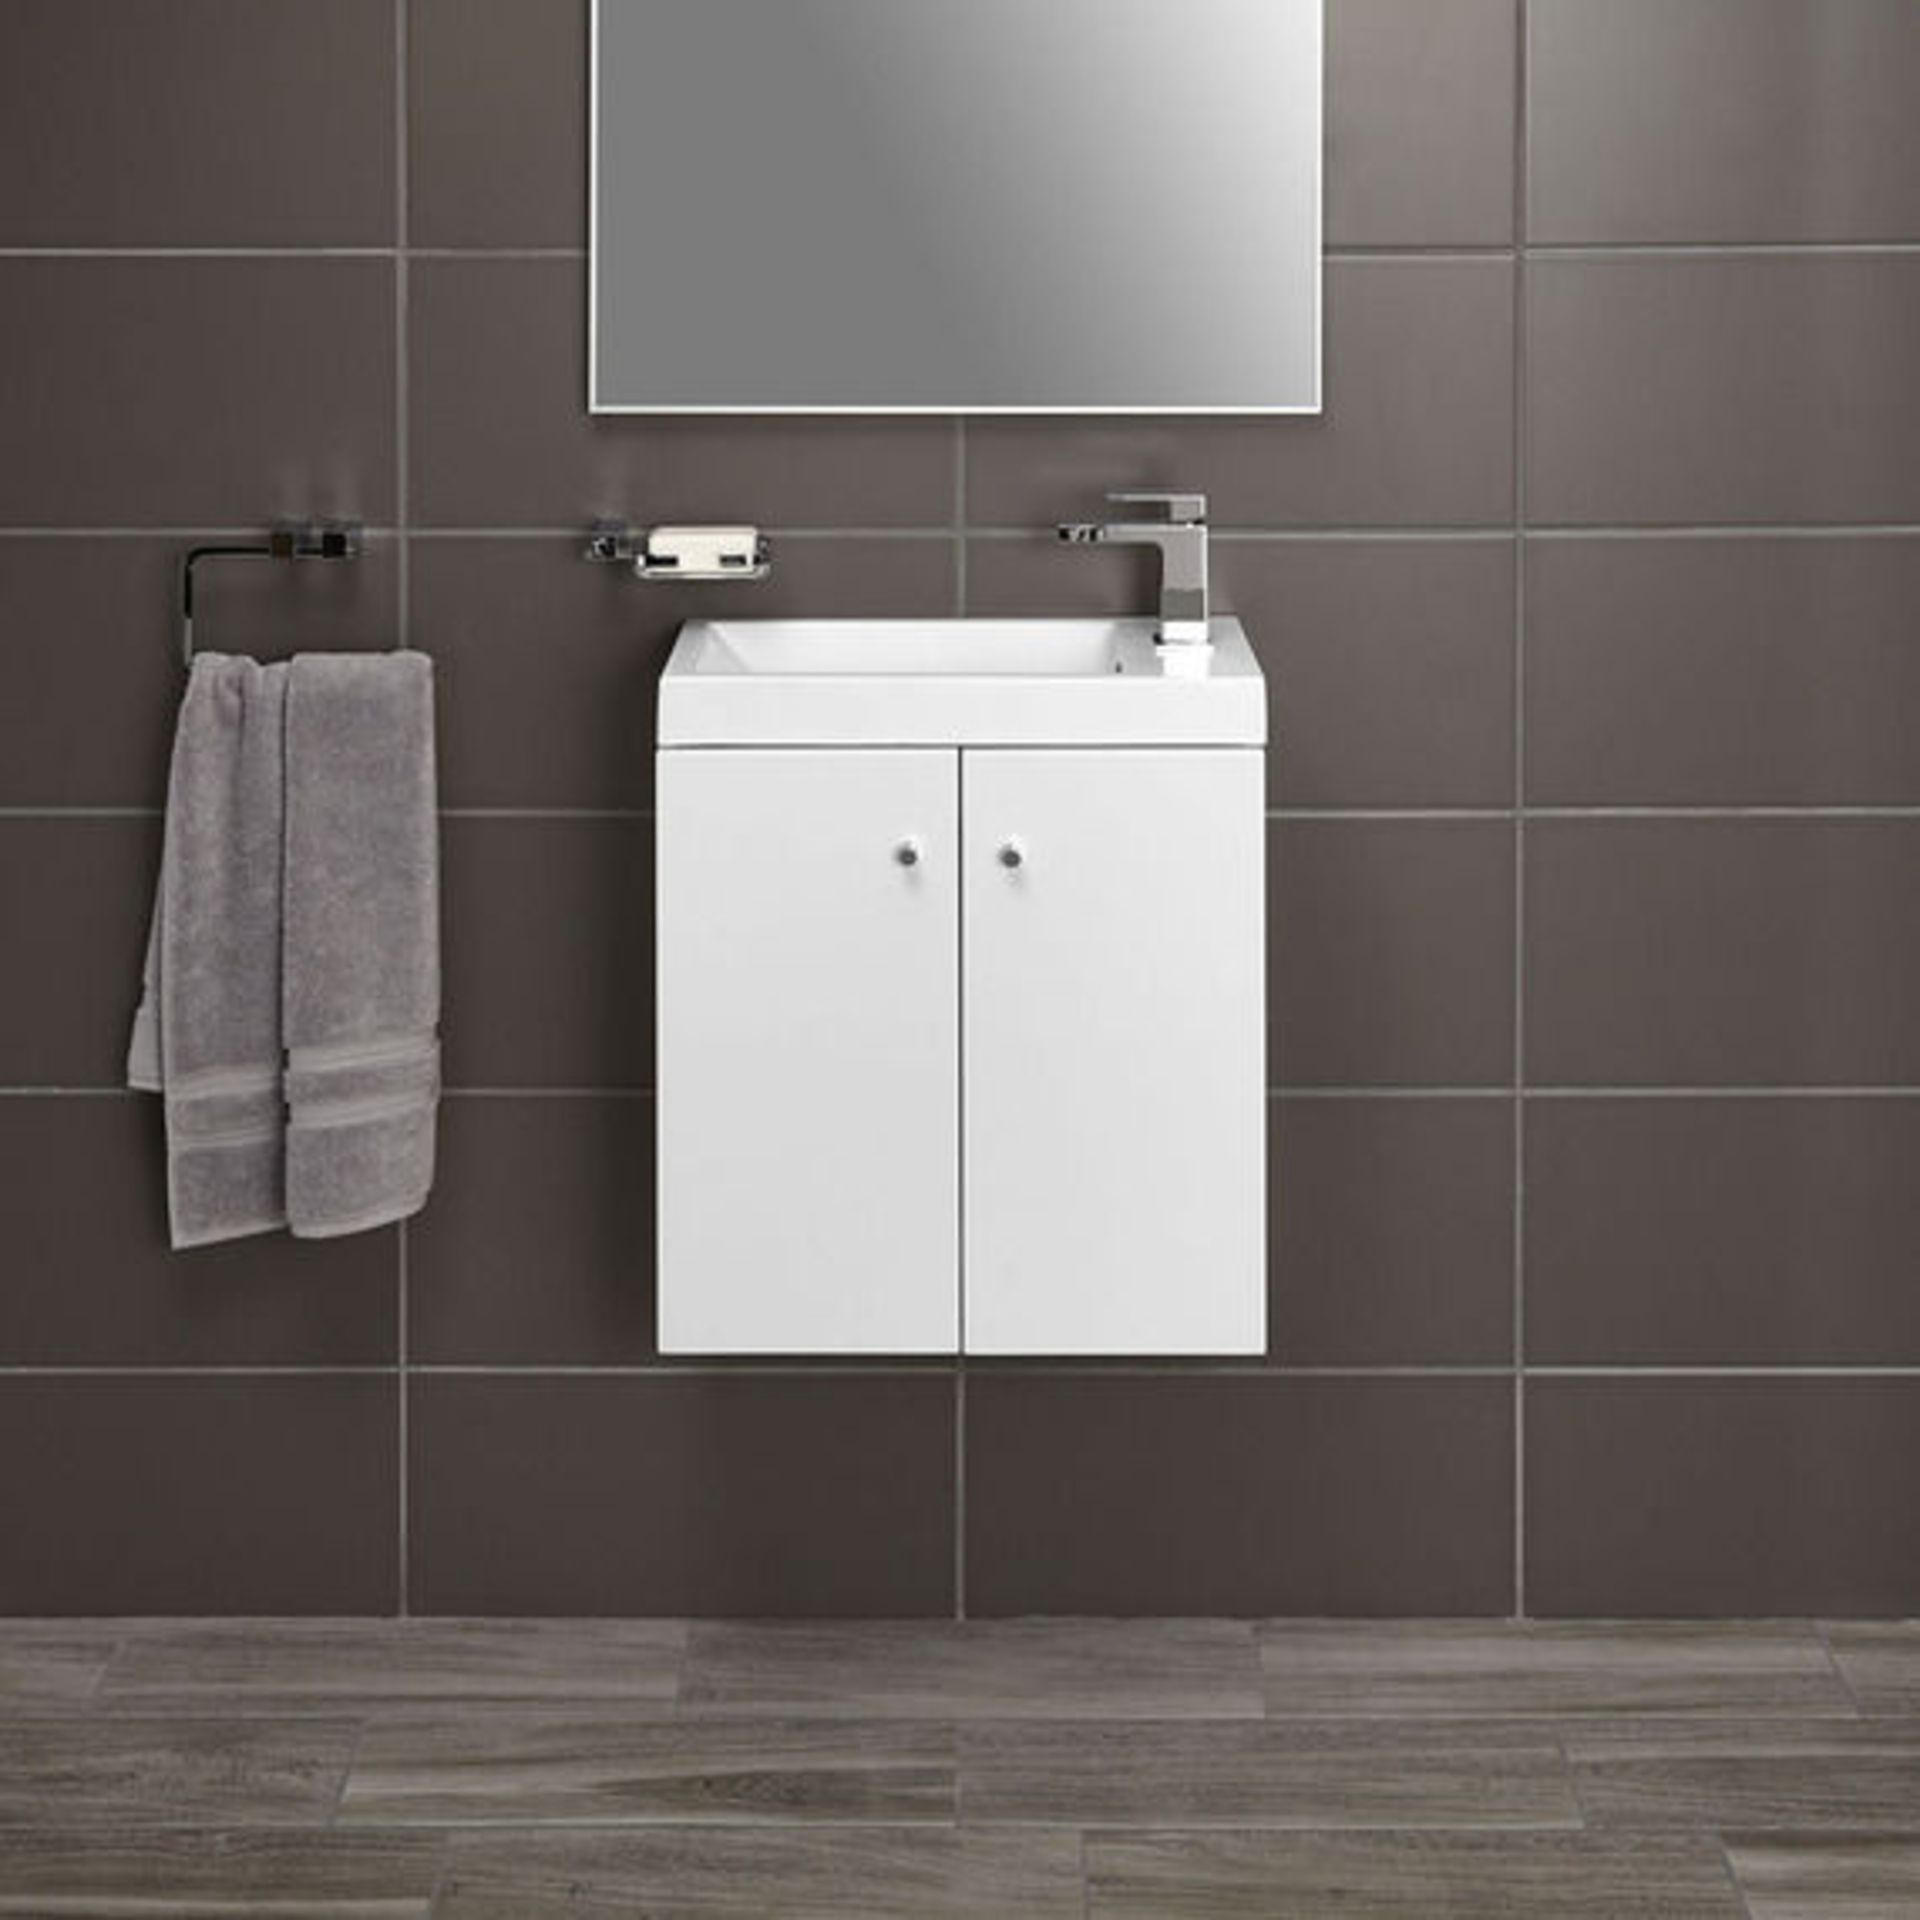 10 x Alpine Duo 495 Wall Hung Vanity Unit  - Gloss White - Brand New Boxed Stock - Dimensions: W49.5 - Image 2 of 5